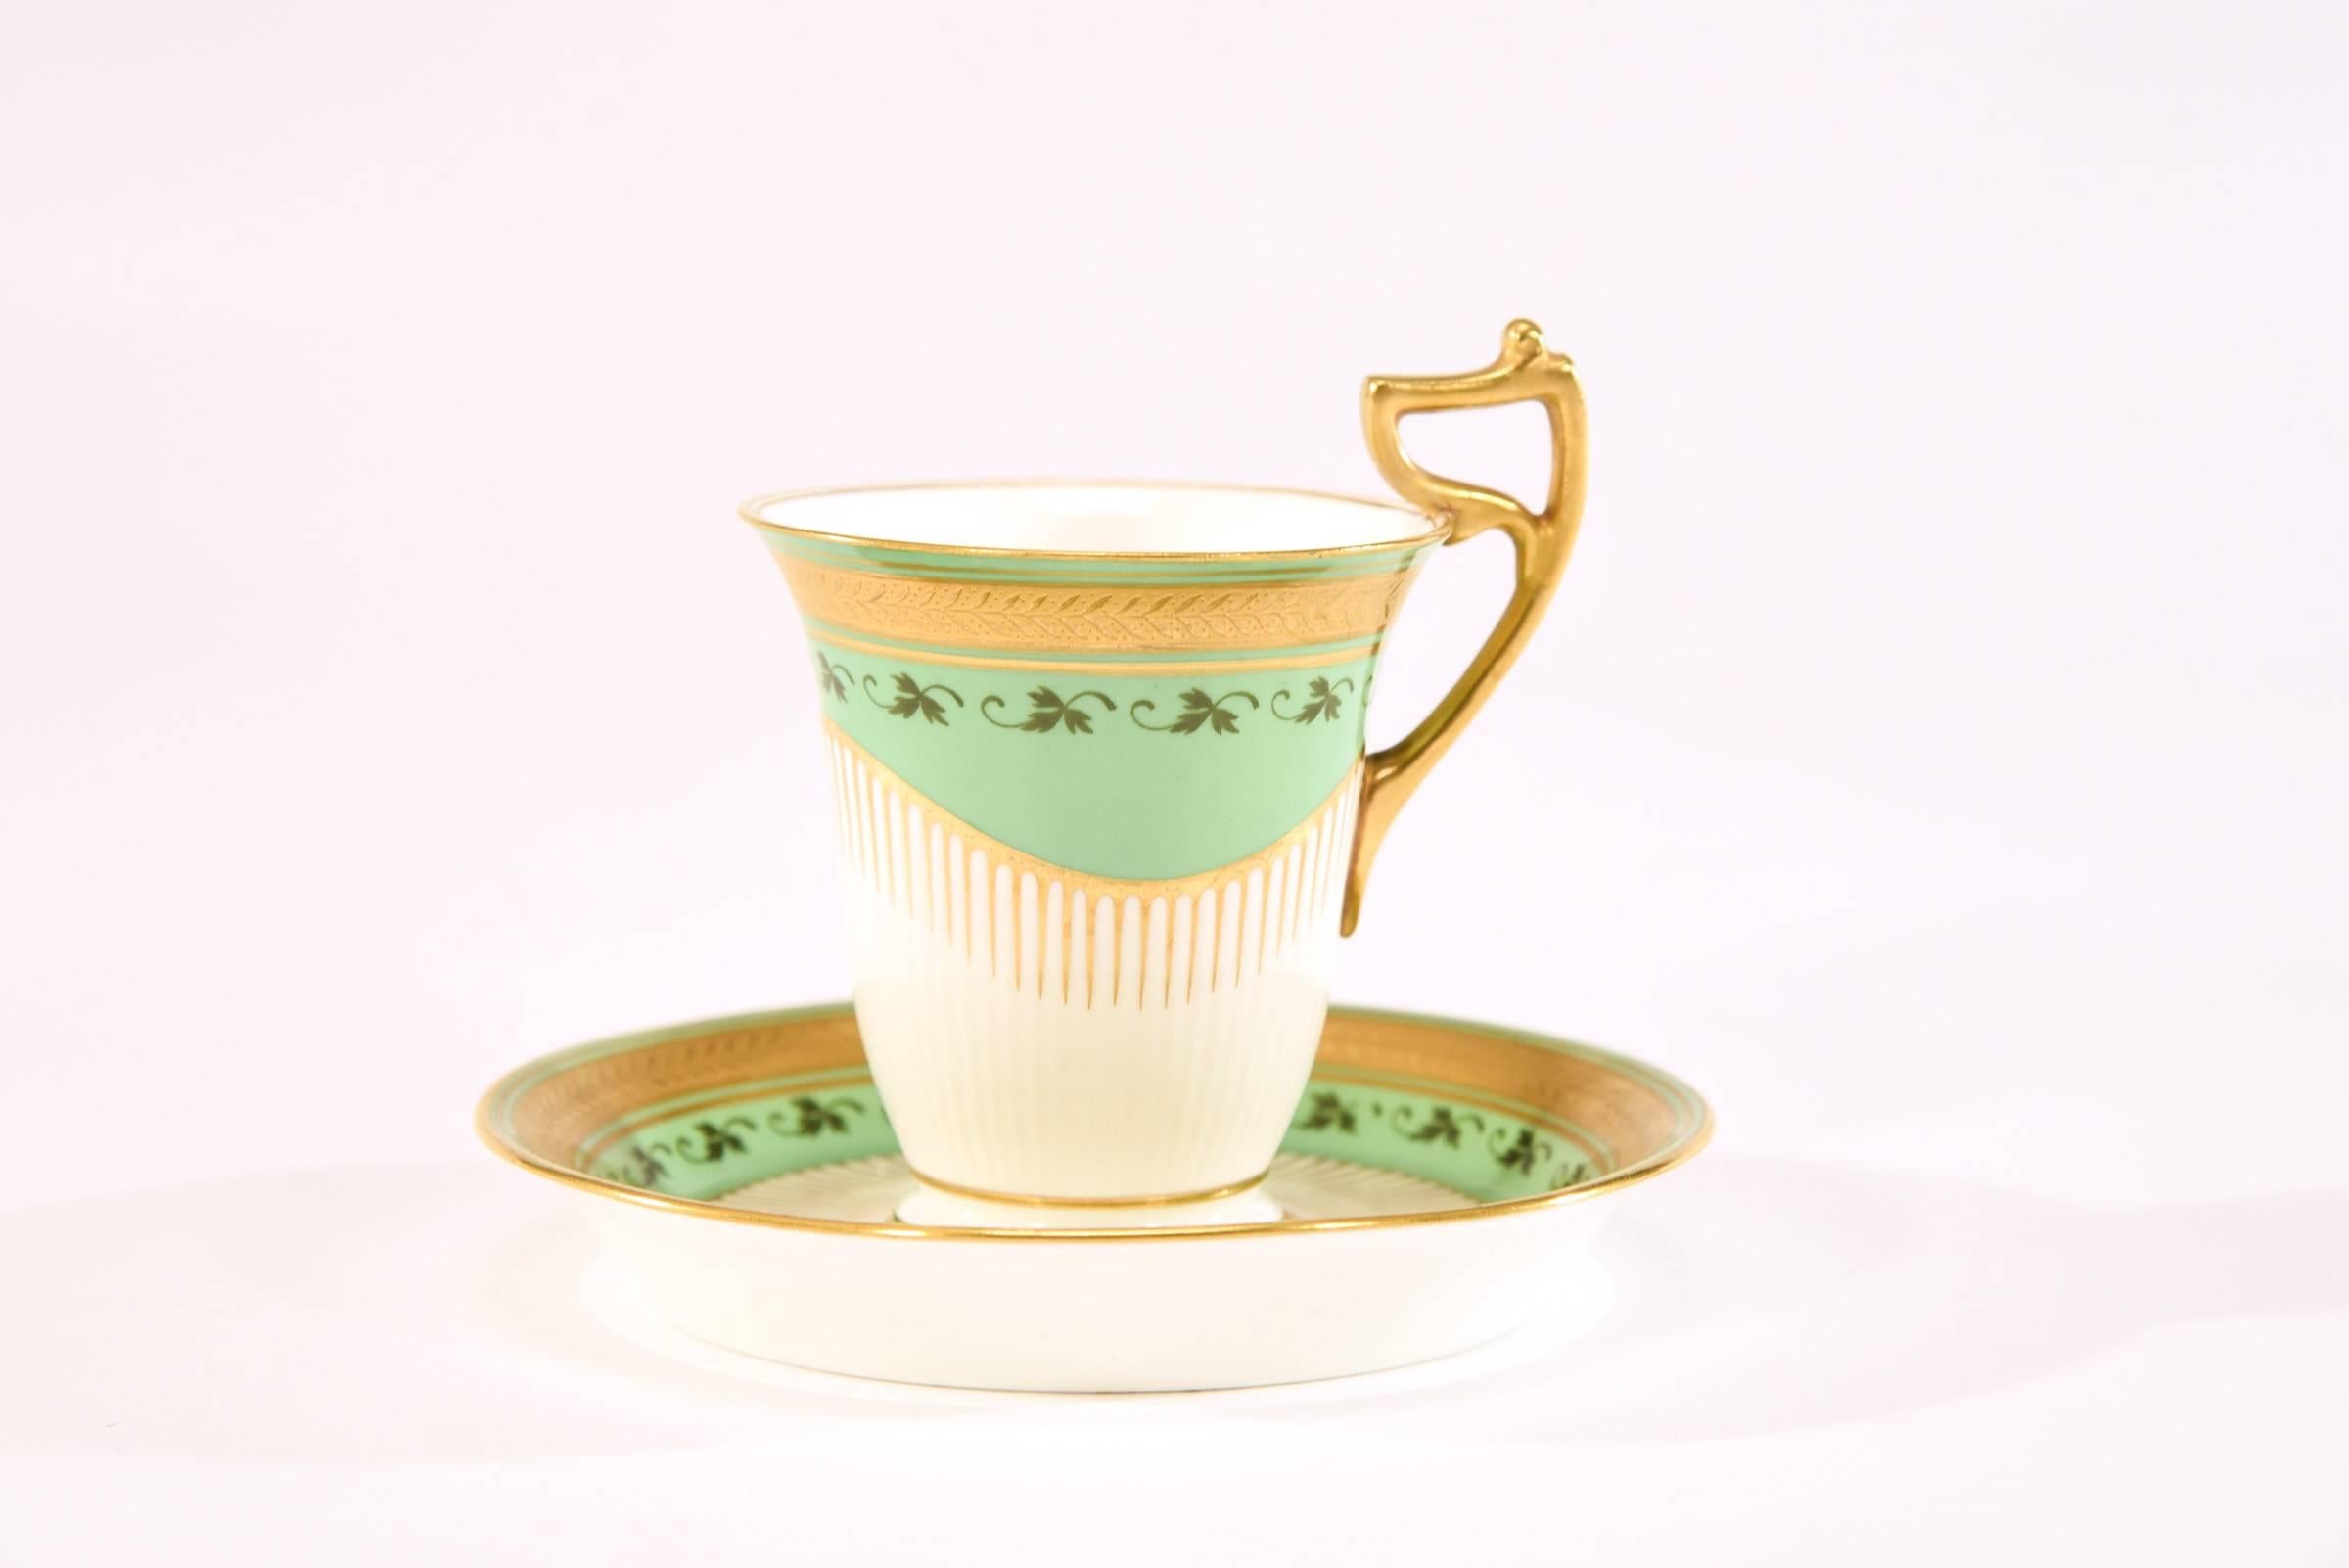 Doulton Burslem Mint Green Hot Chocolate Set for 4 Gilt Gold & White Enamel In Excellent Condition For Sale In Great Barrington, MA